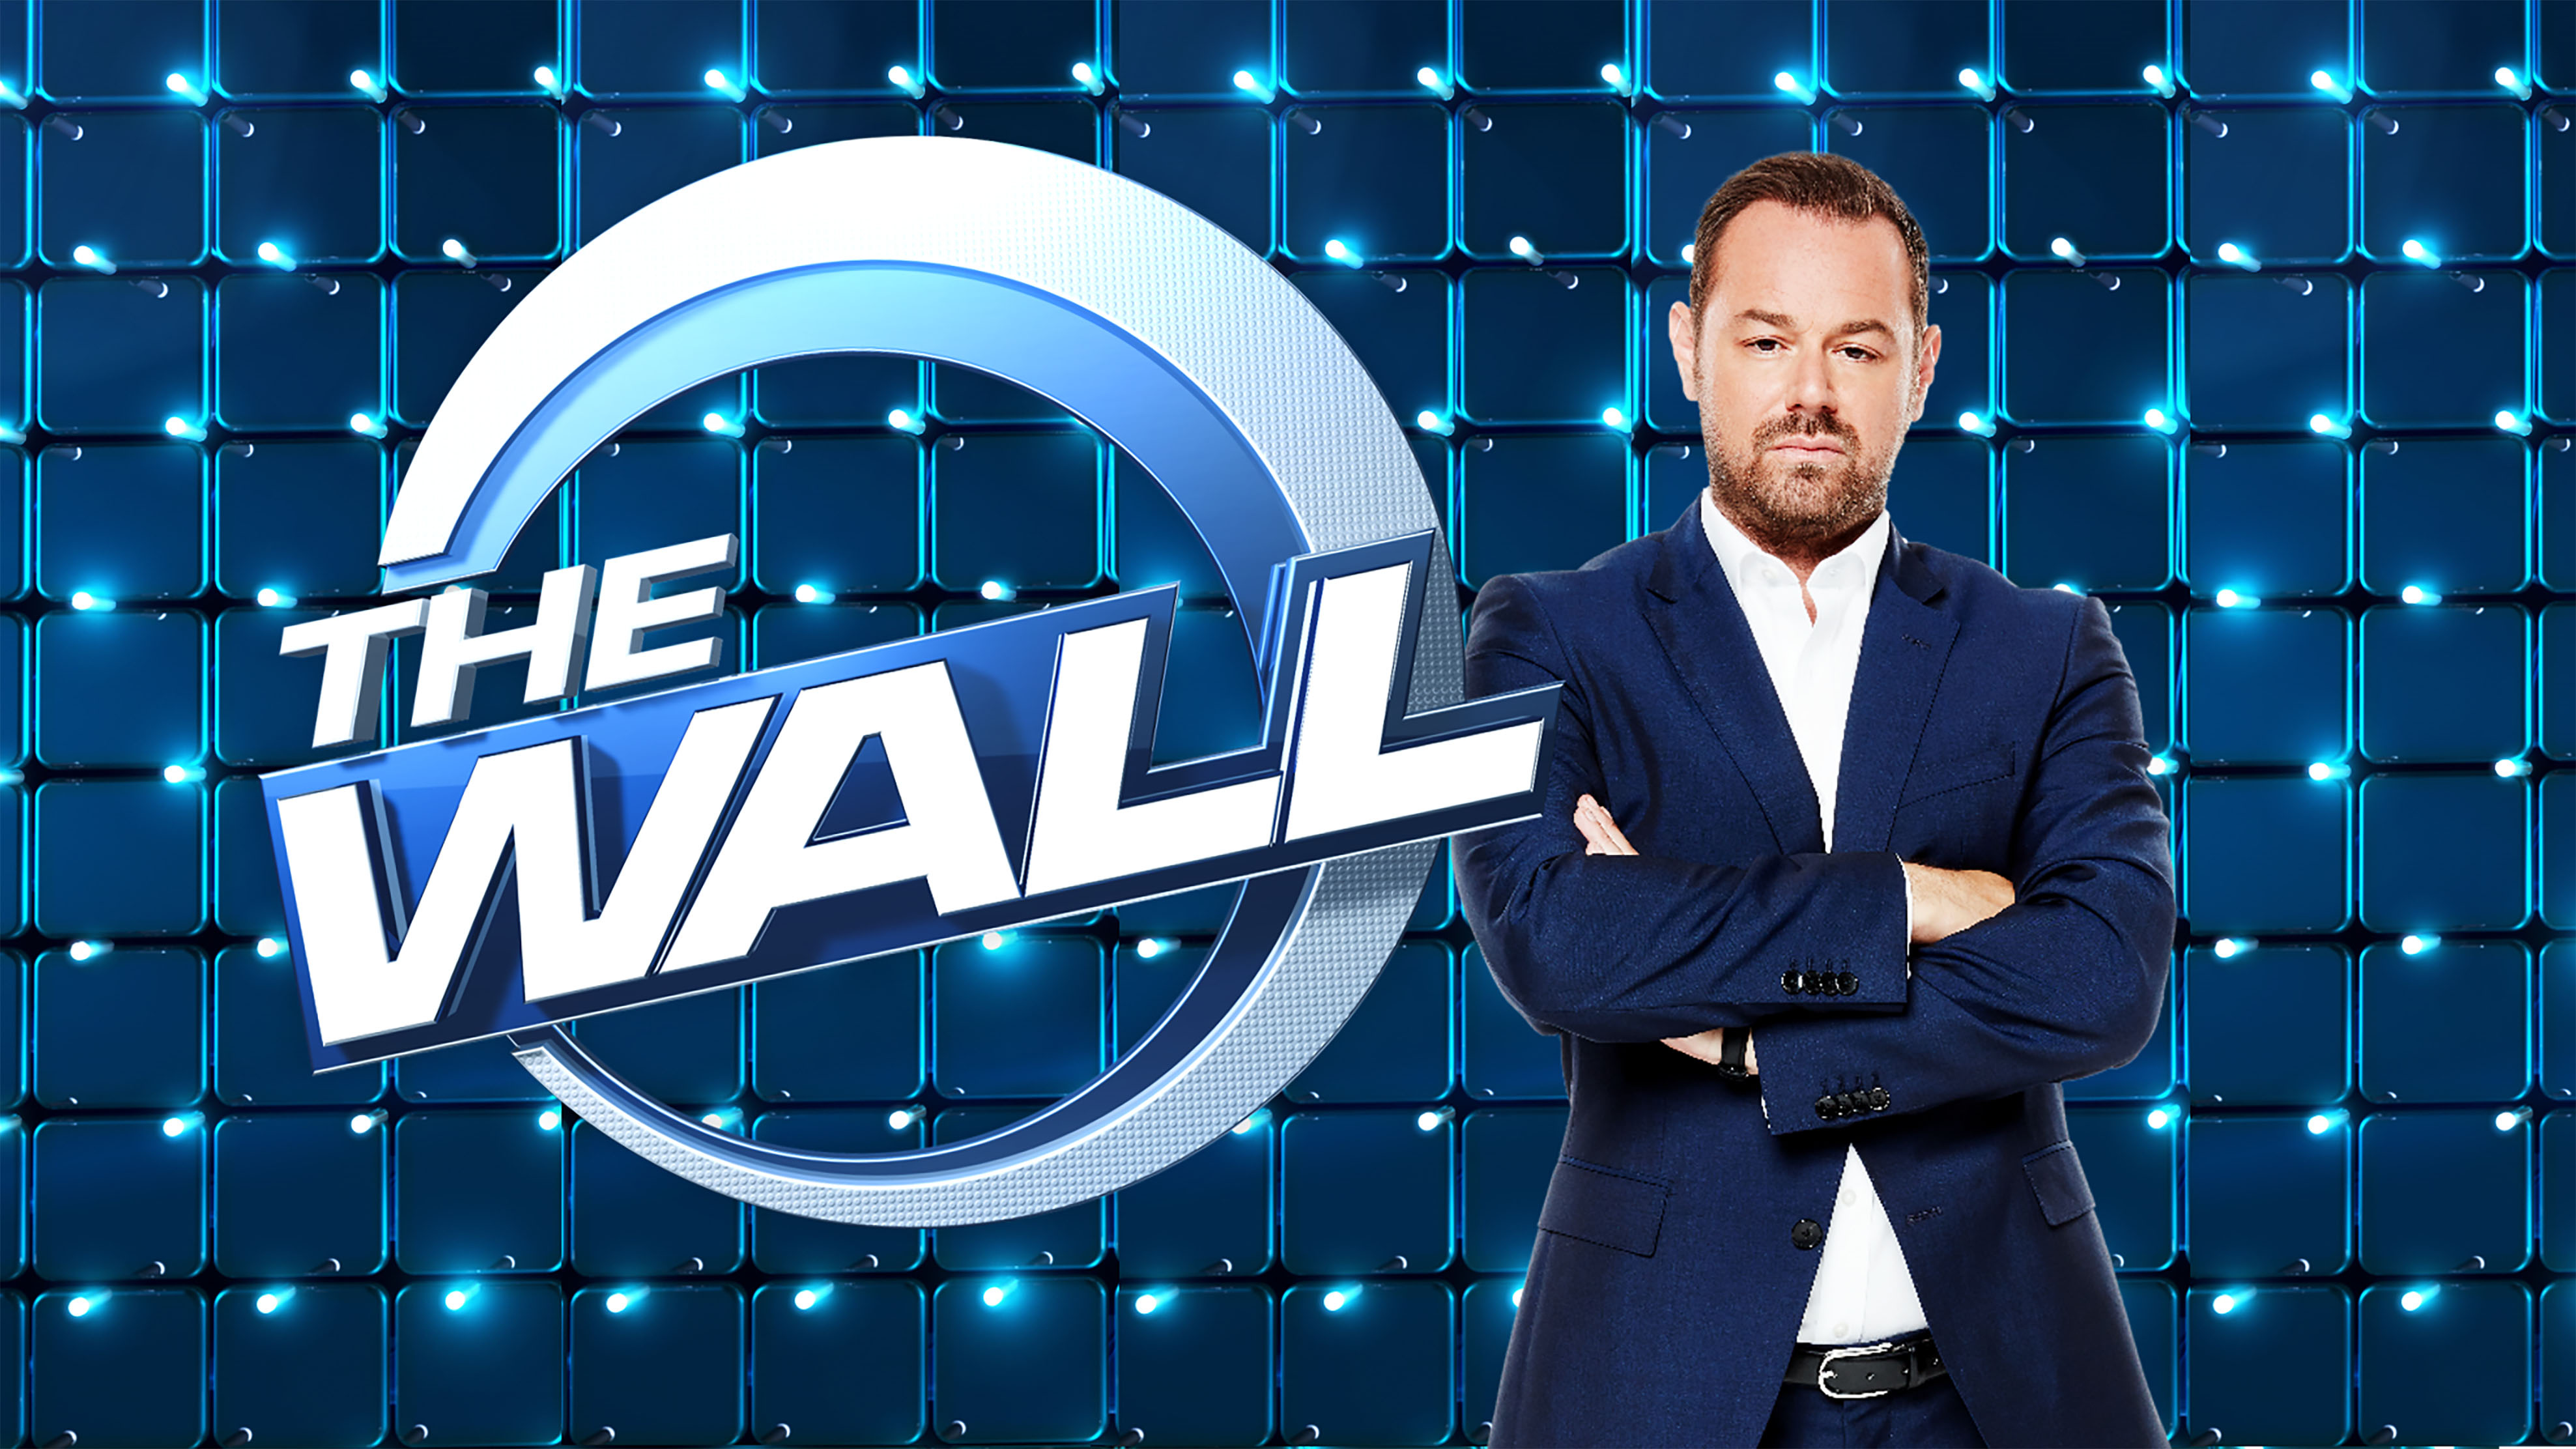 Danny Dyer will present The Wall